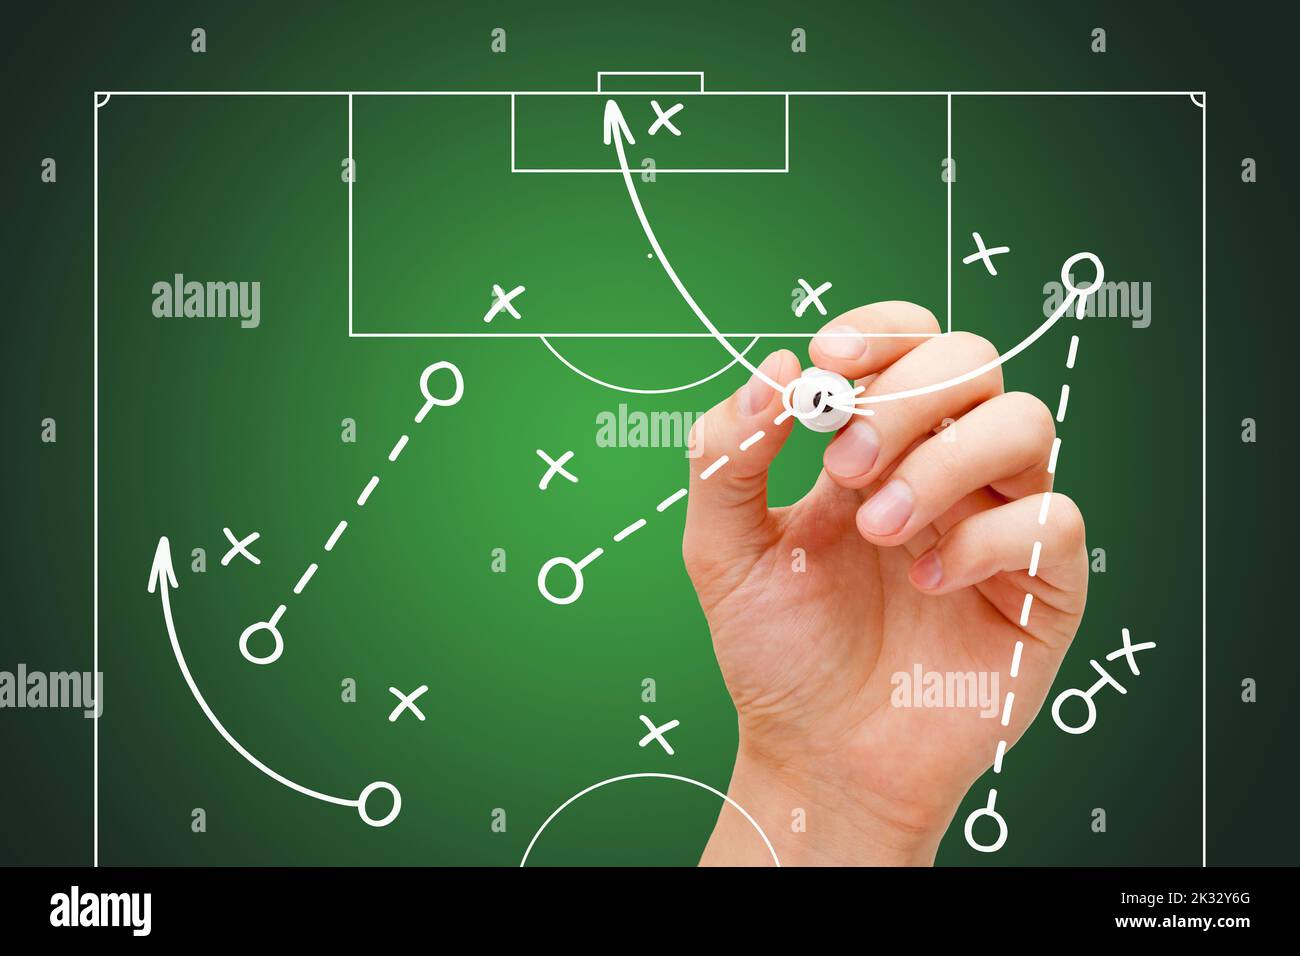 26 To desk ideas  football pitch, football tactics, black and white  football